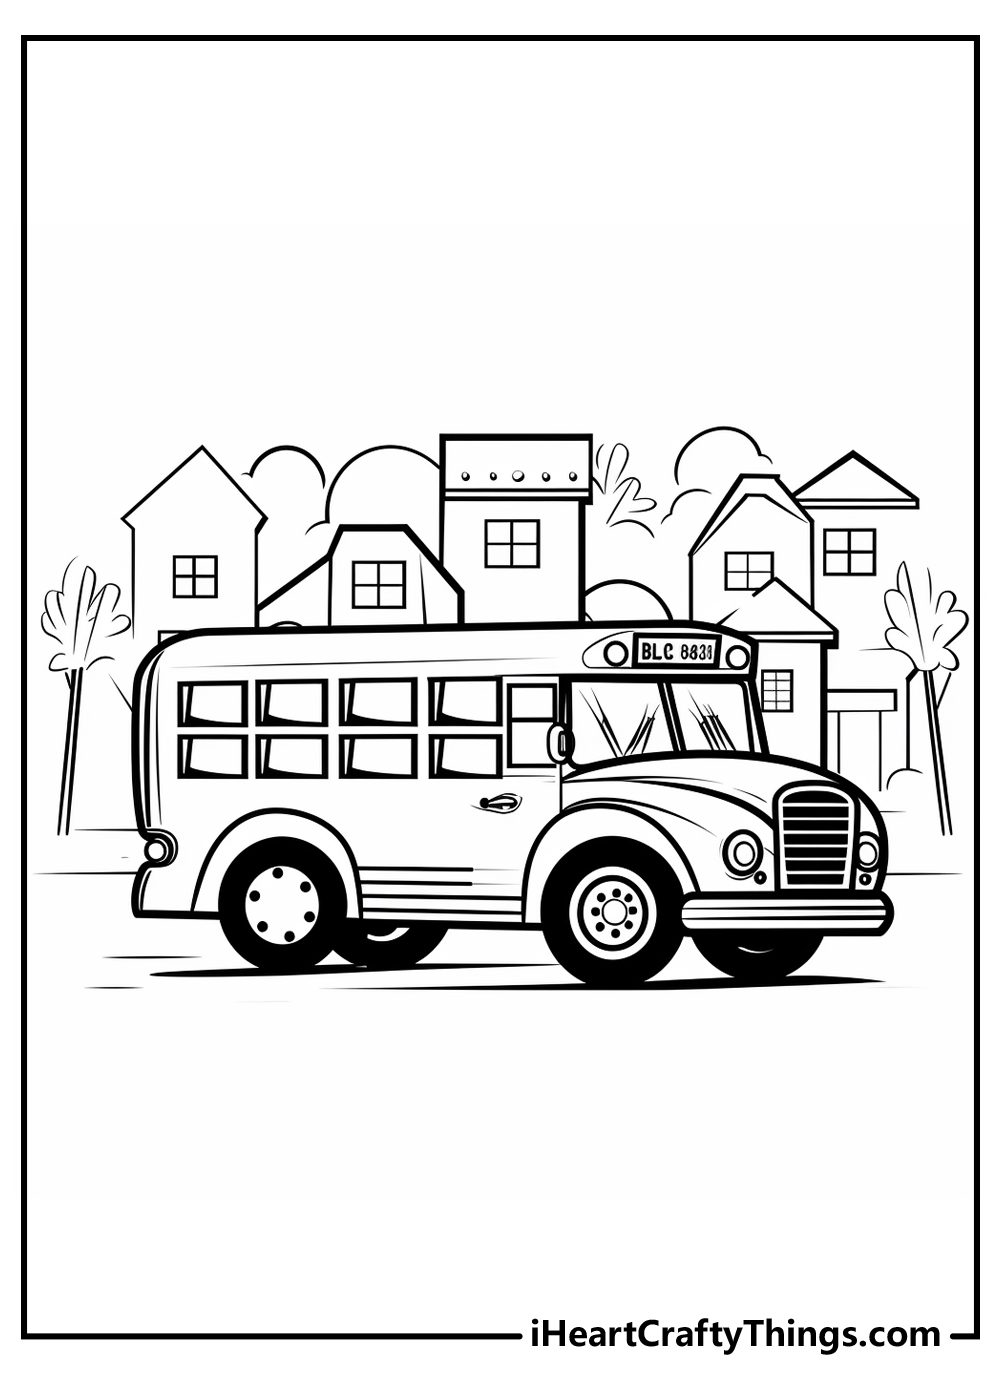 black-and-white school bus coloring pages